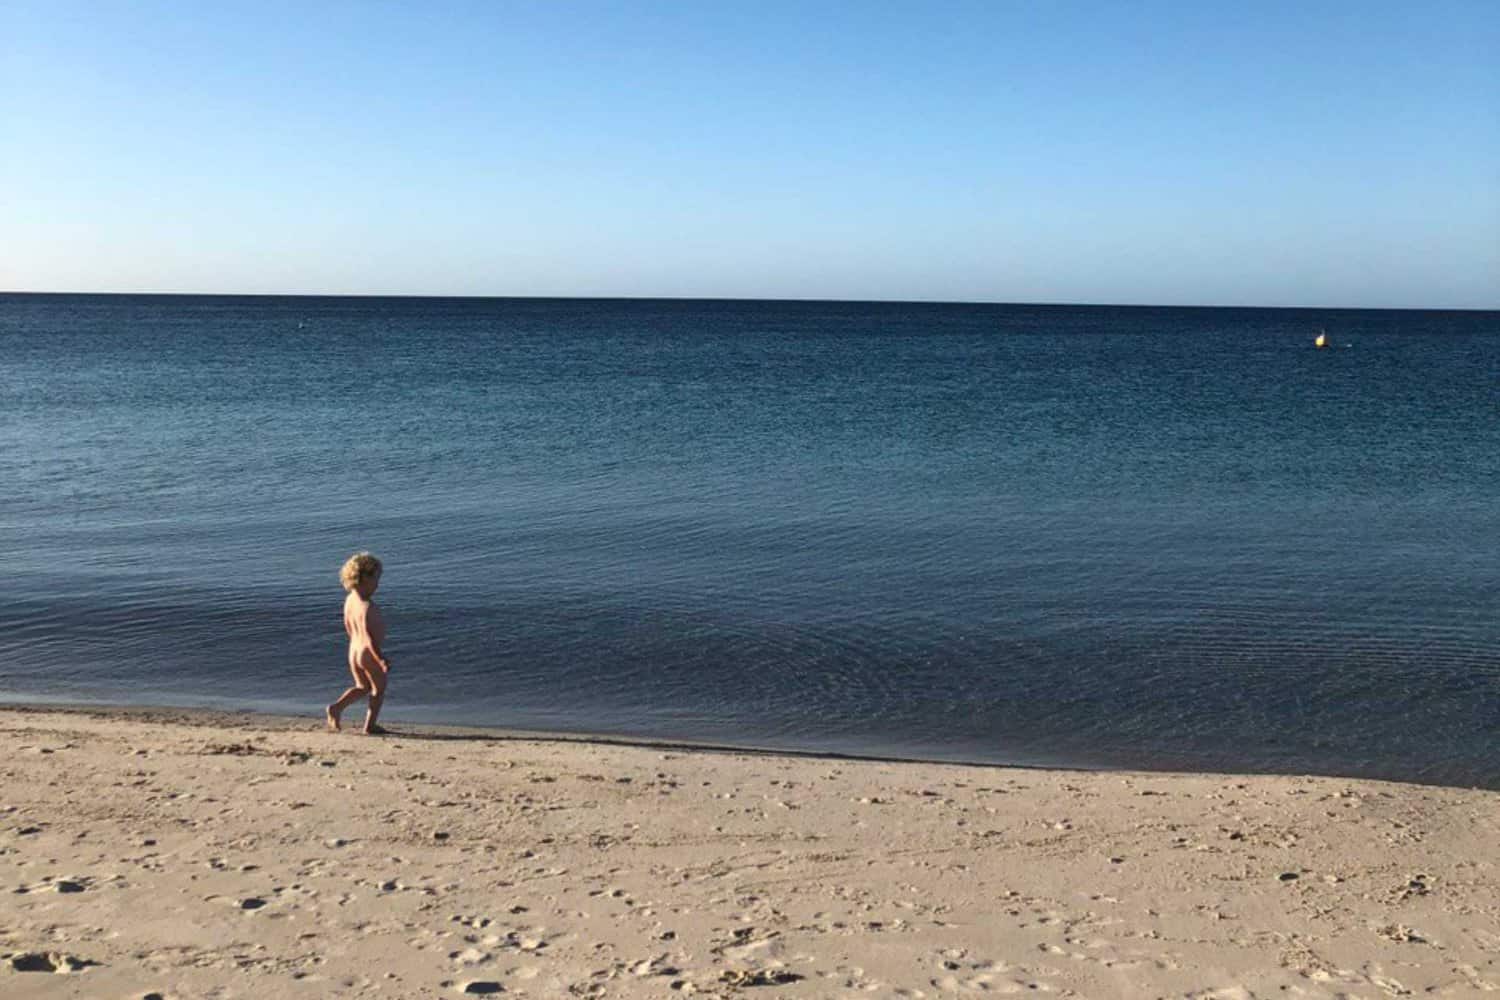 Child standing on the shore of Busselton beaches, looking out at the calm sea on a clear day.